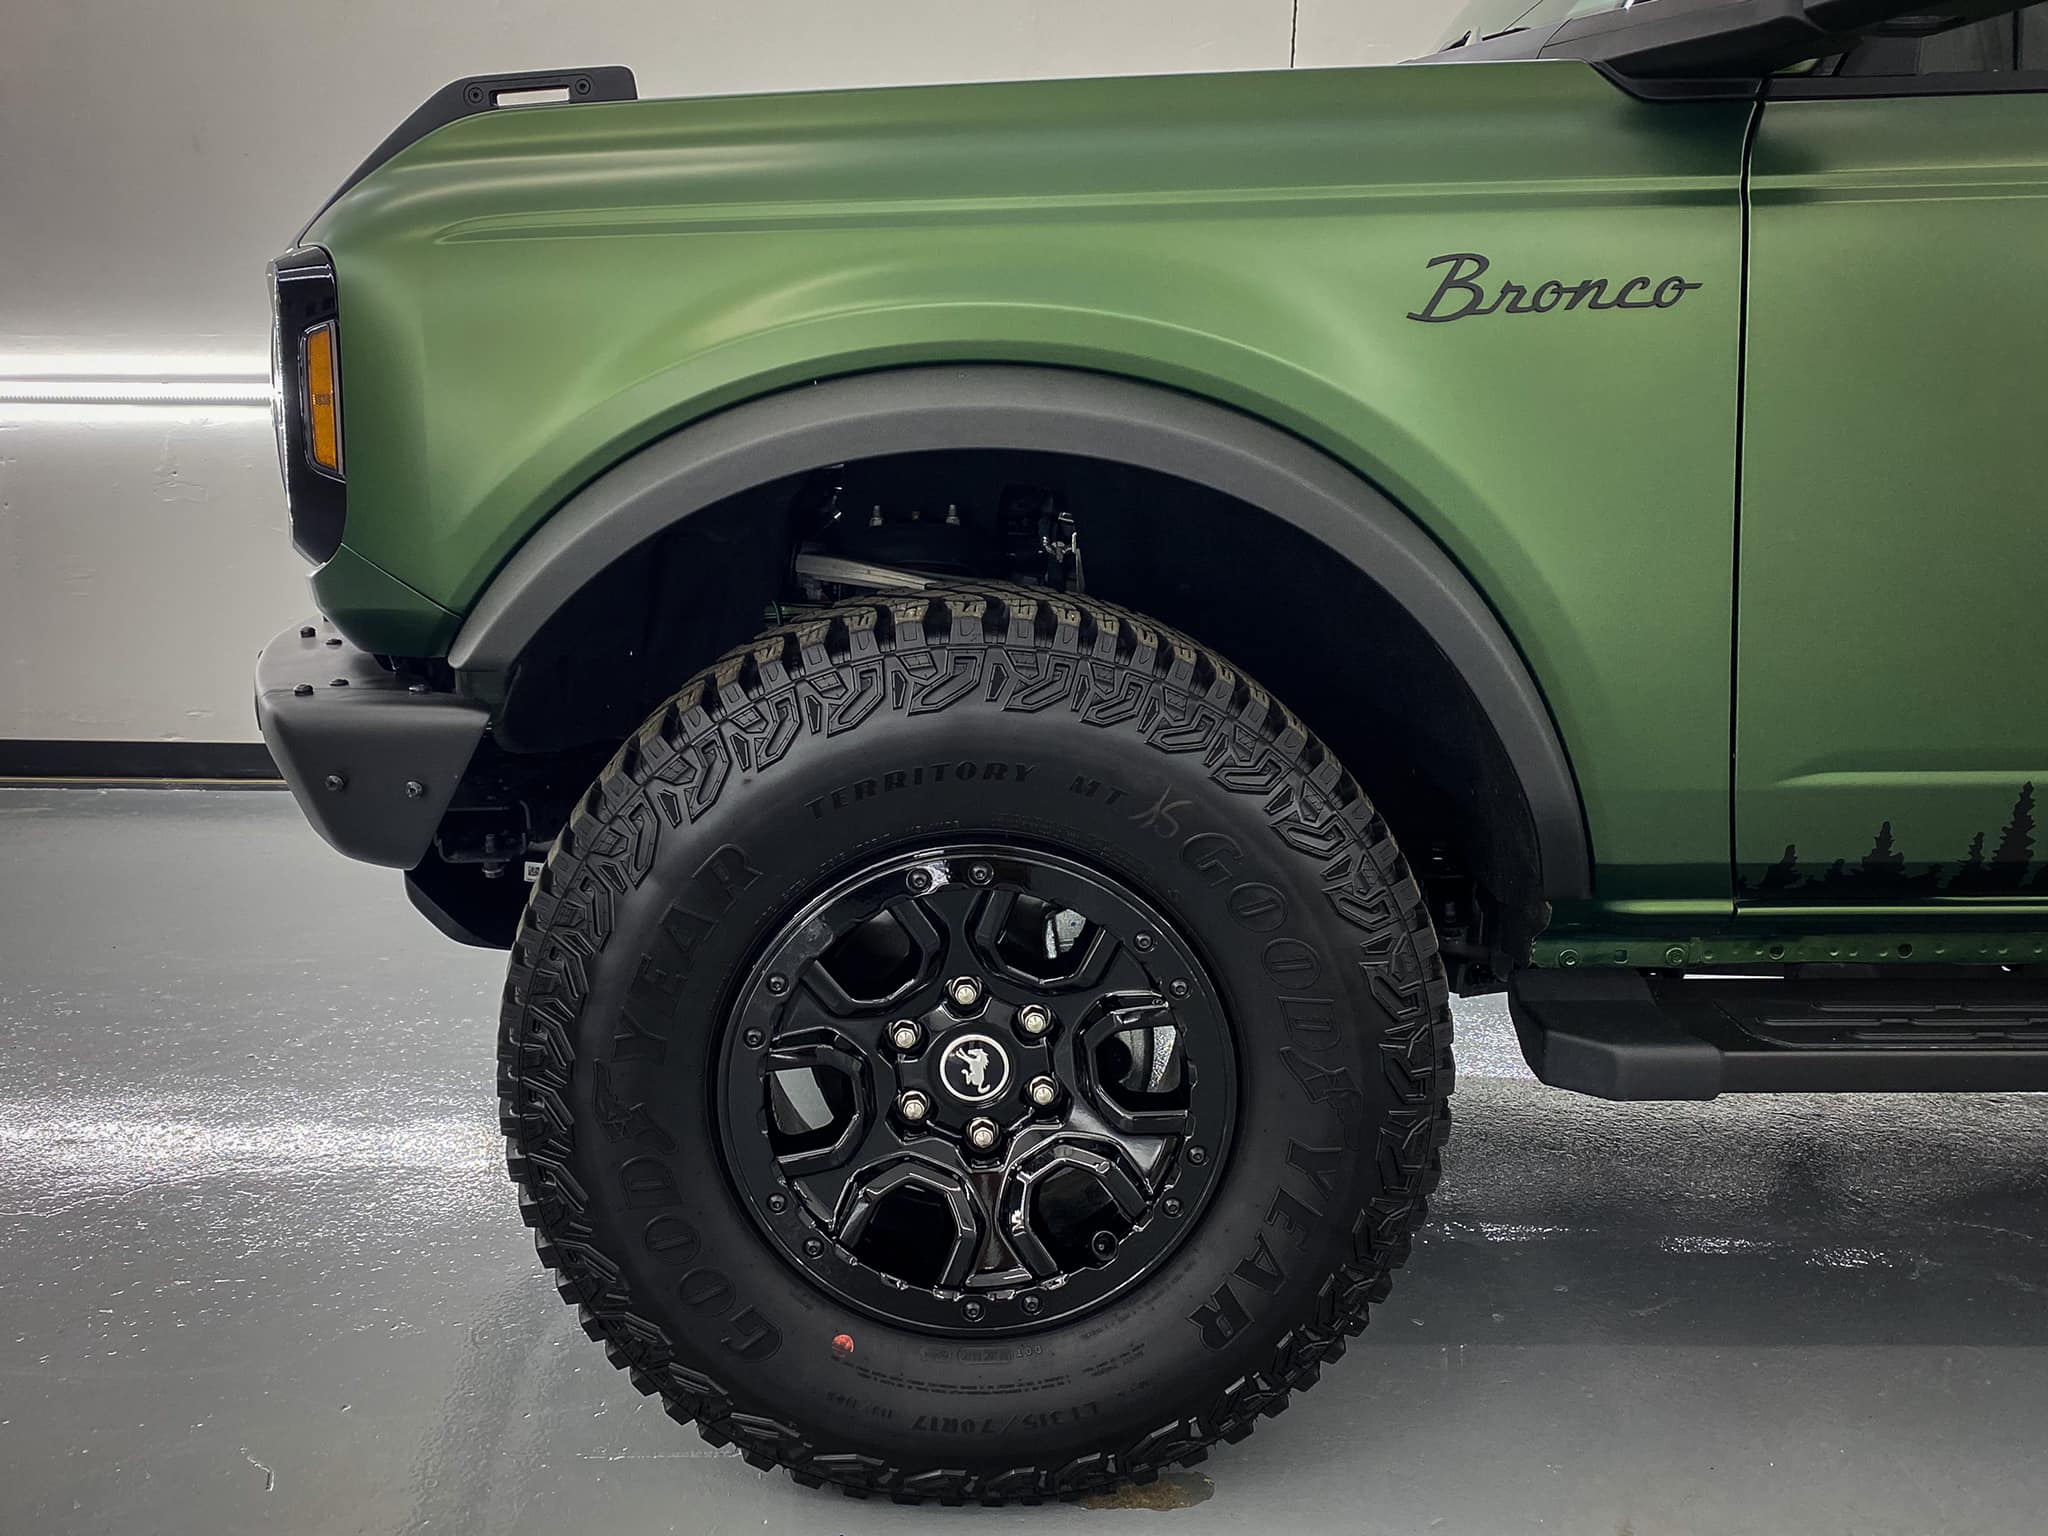 Eruption Green Bronco XPEL Stealth PPF Wrapped + Graphics + Racing Stripes 3.jpg